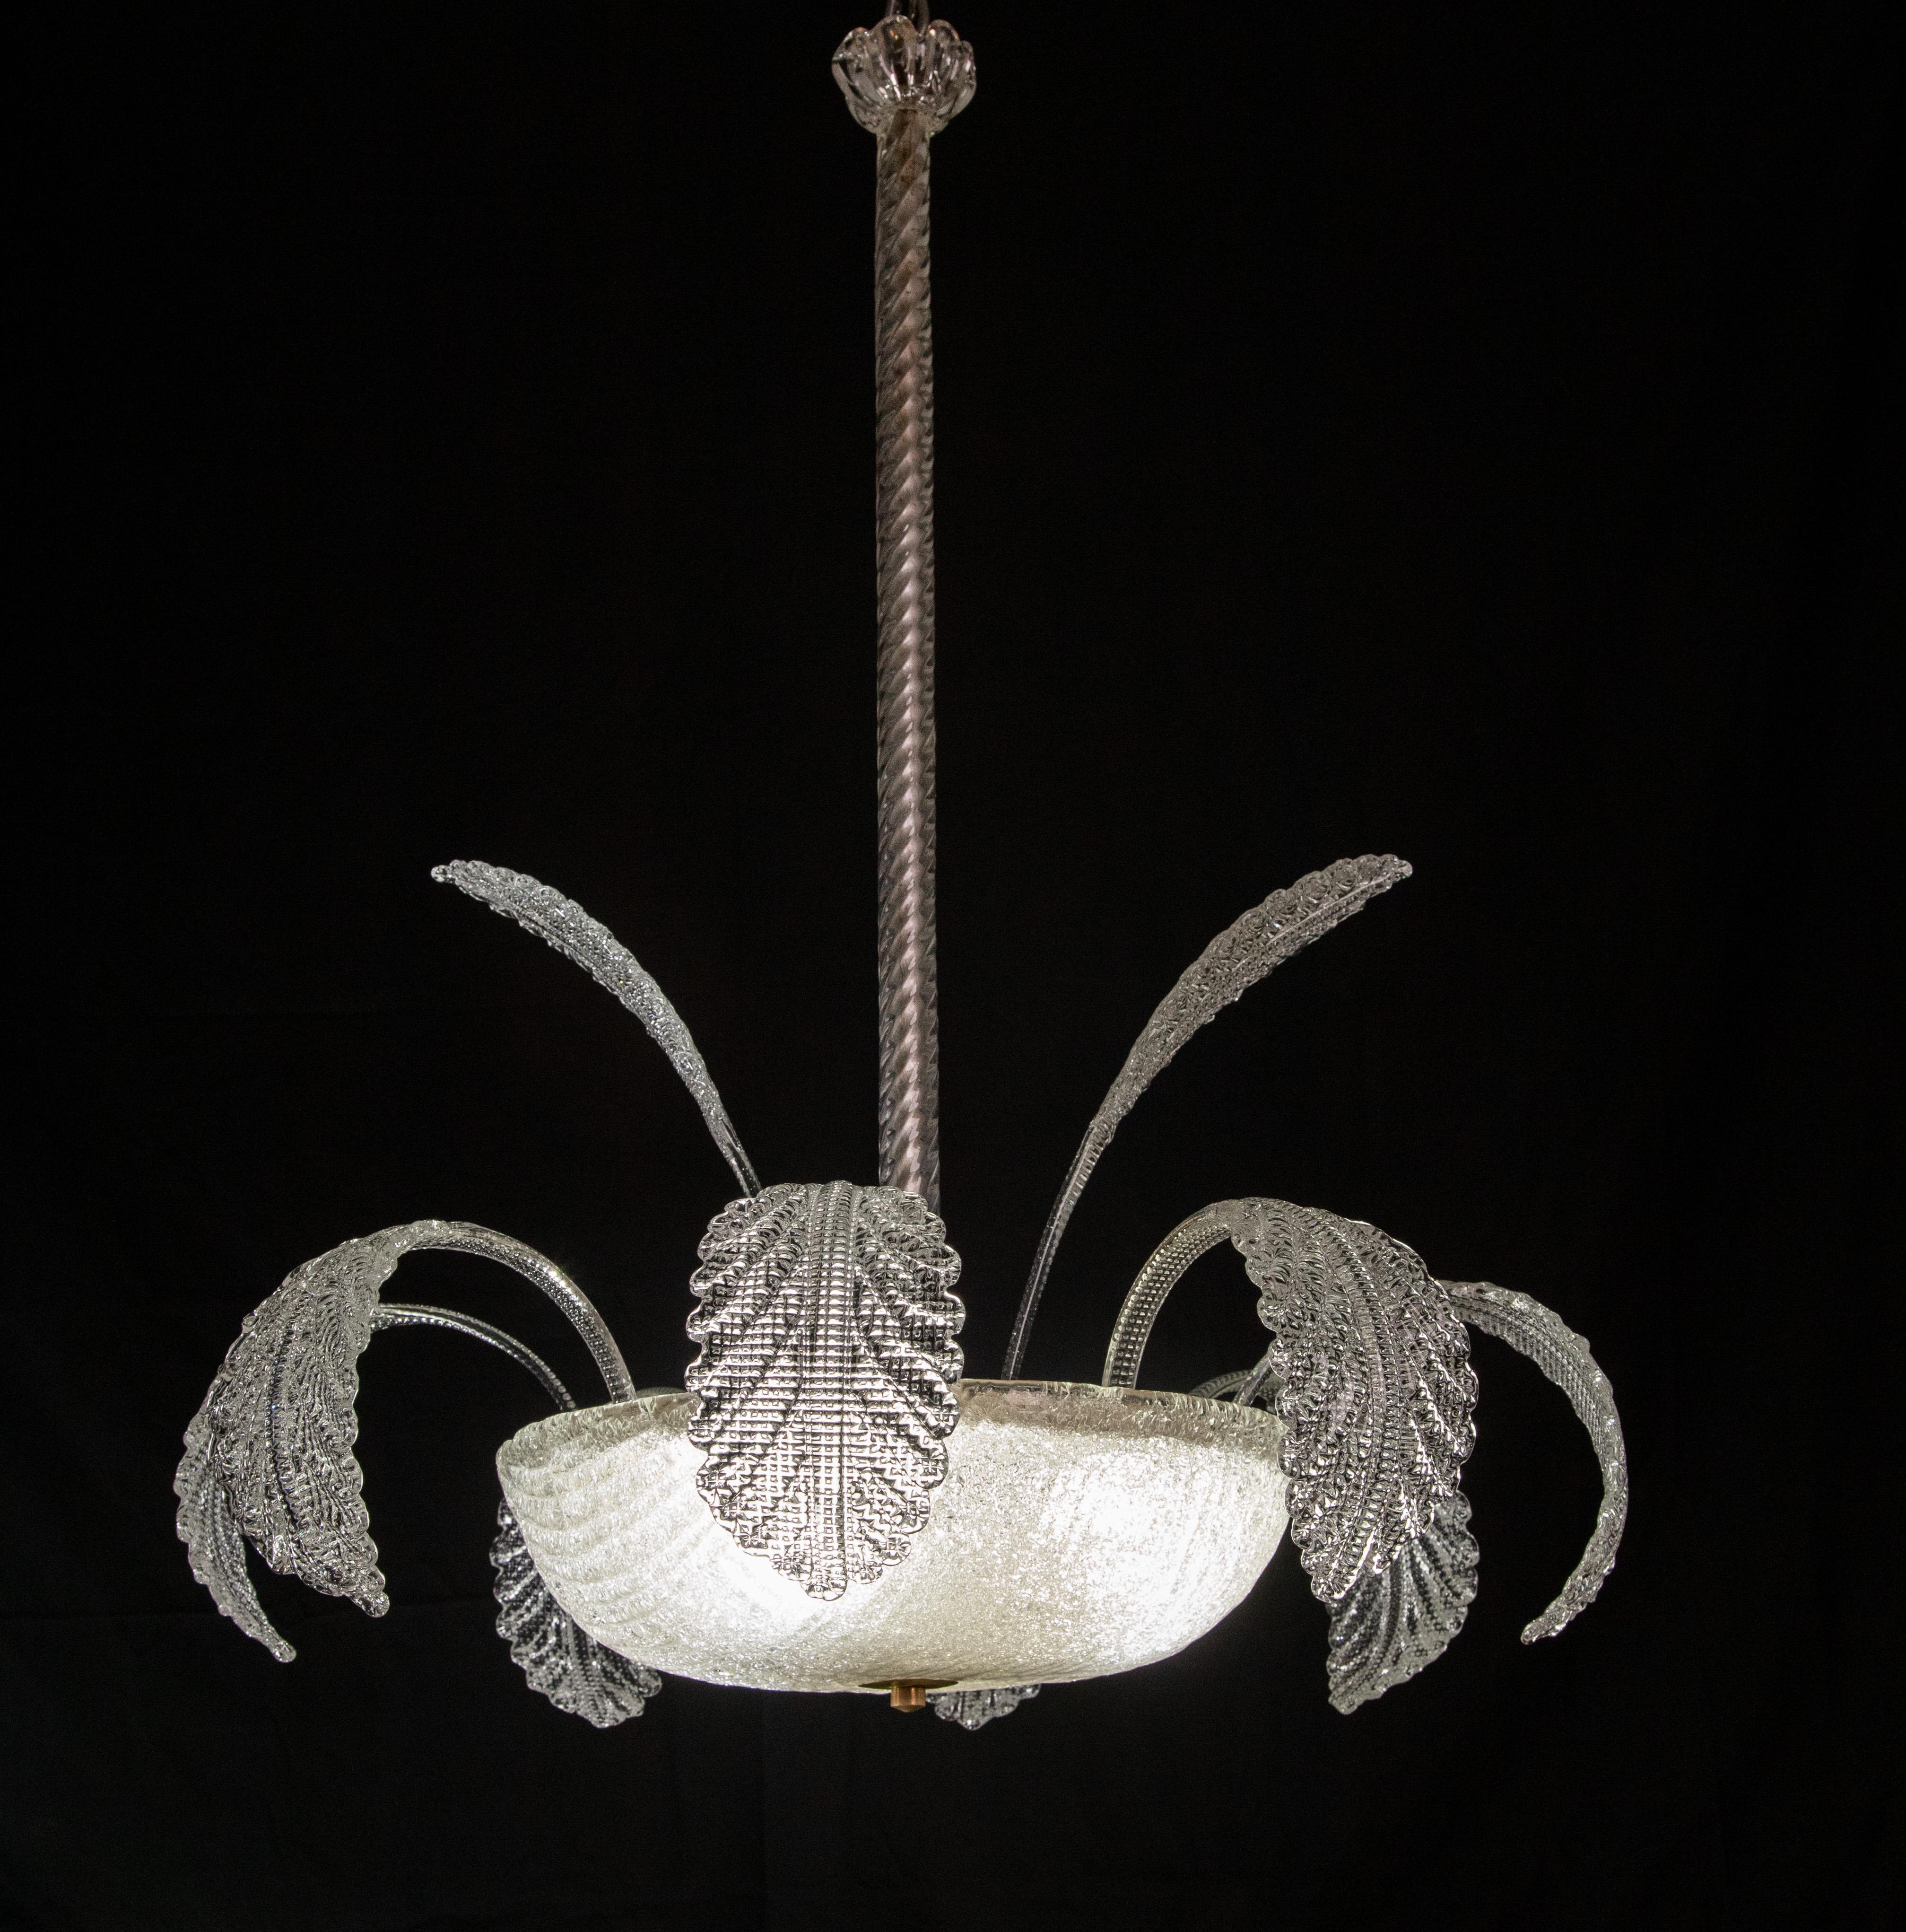 Genuine murano glass chandelier. Handmade in Murano by Barovier e Toso.
Period: 1950s
Condition: perfect condition and fully working. 
3 e27 light bulb.
